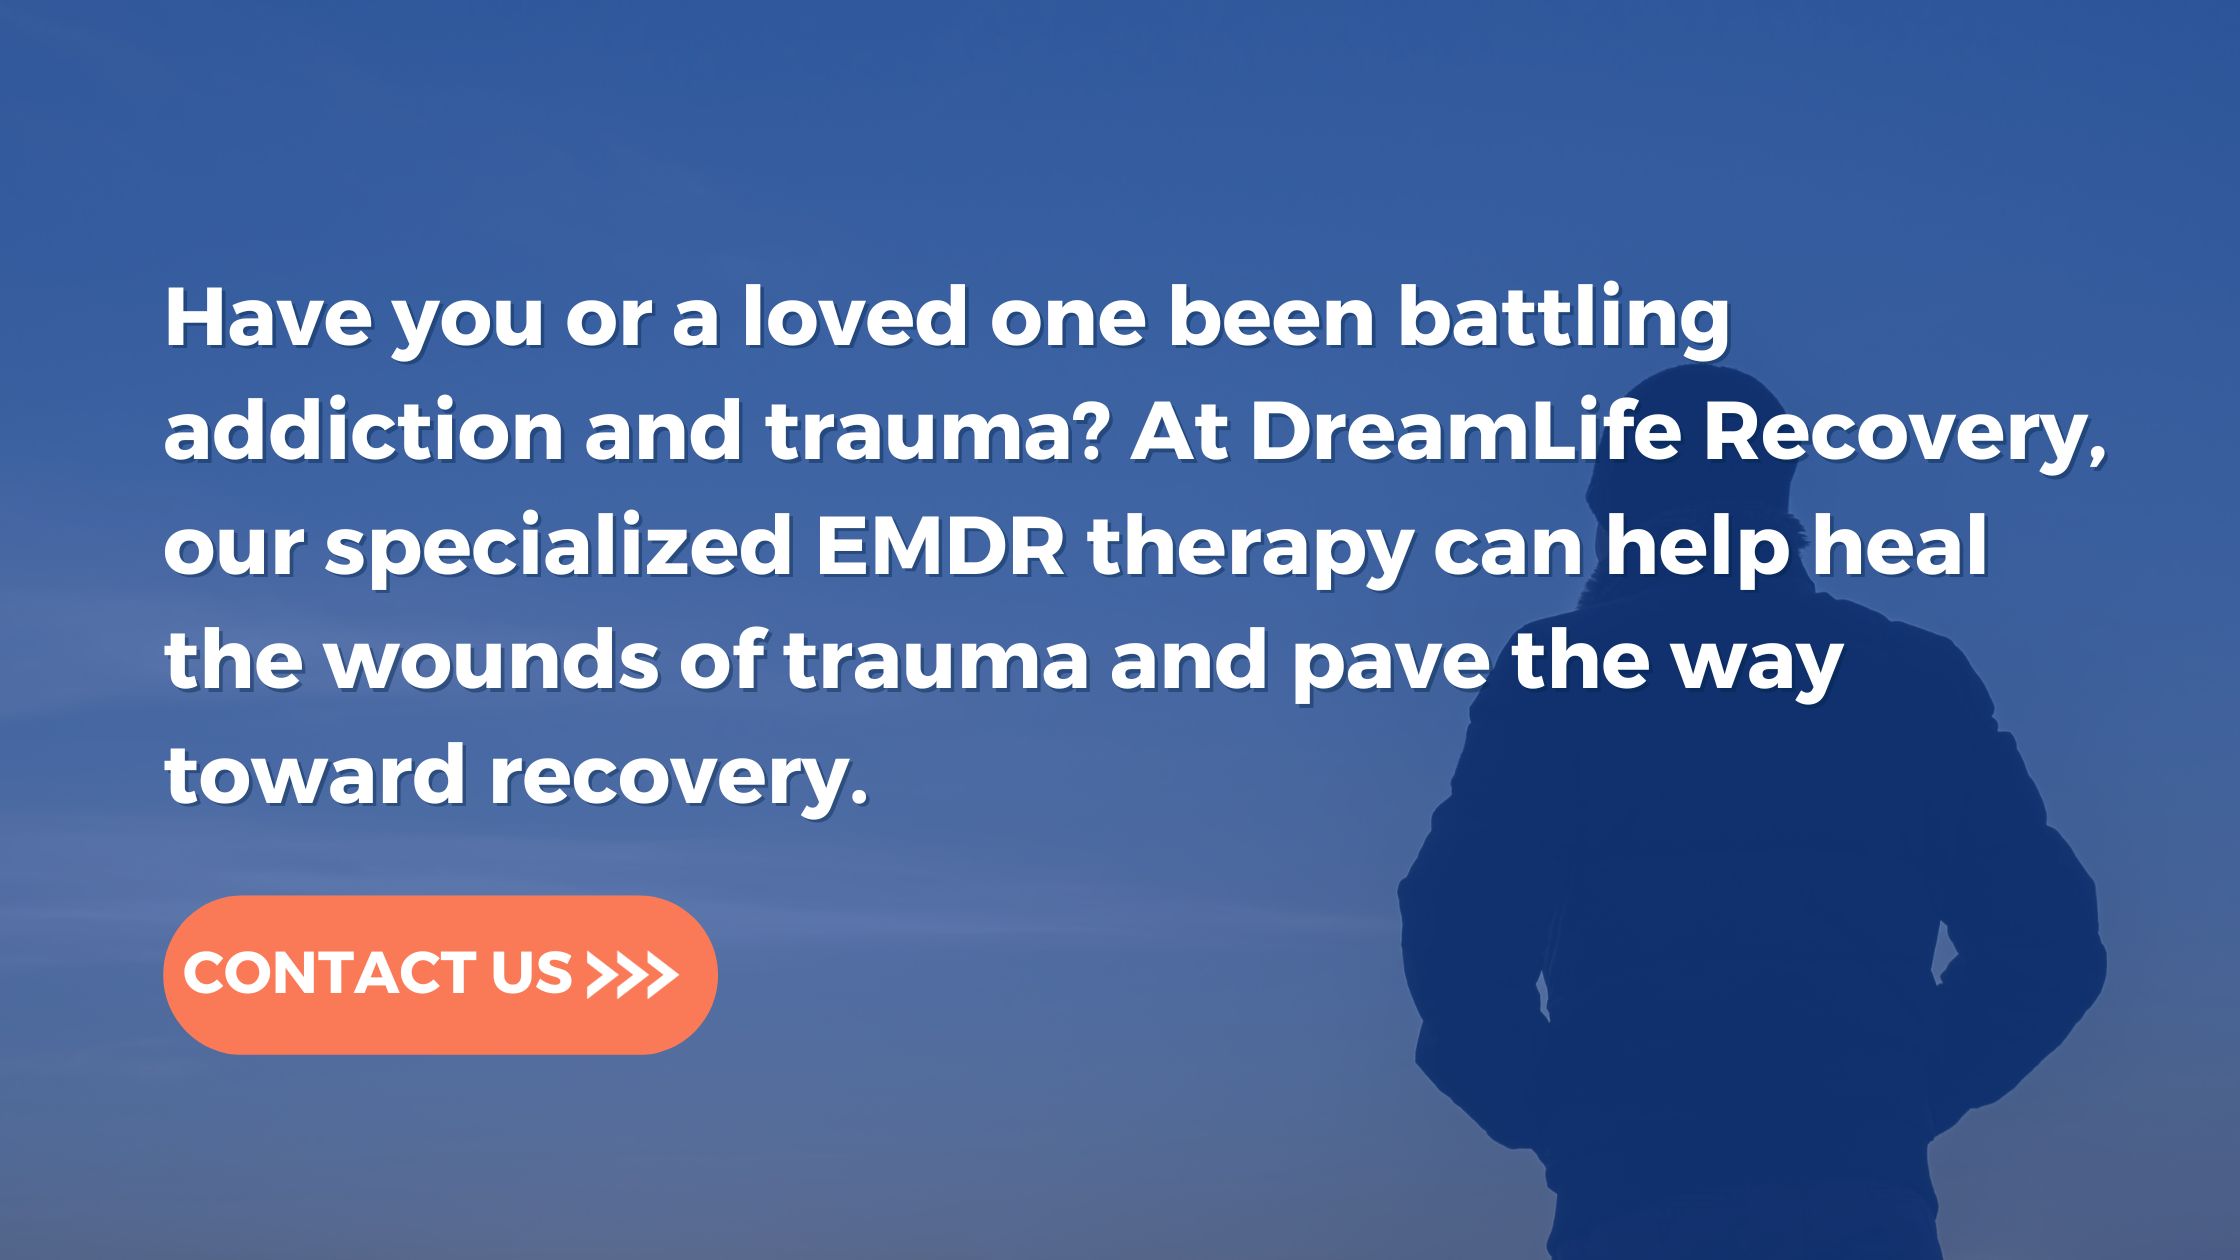 Receive EMDR therapy at DreamLife Recovery